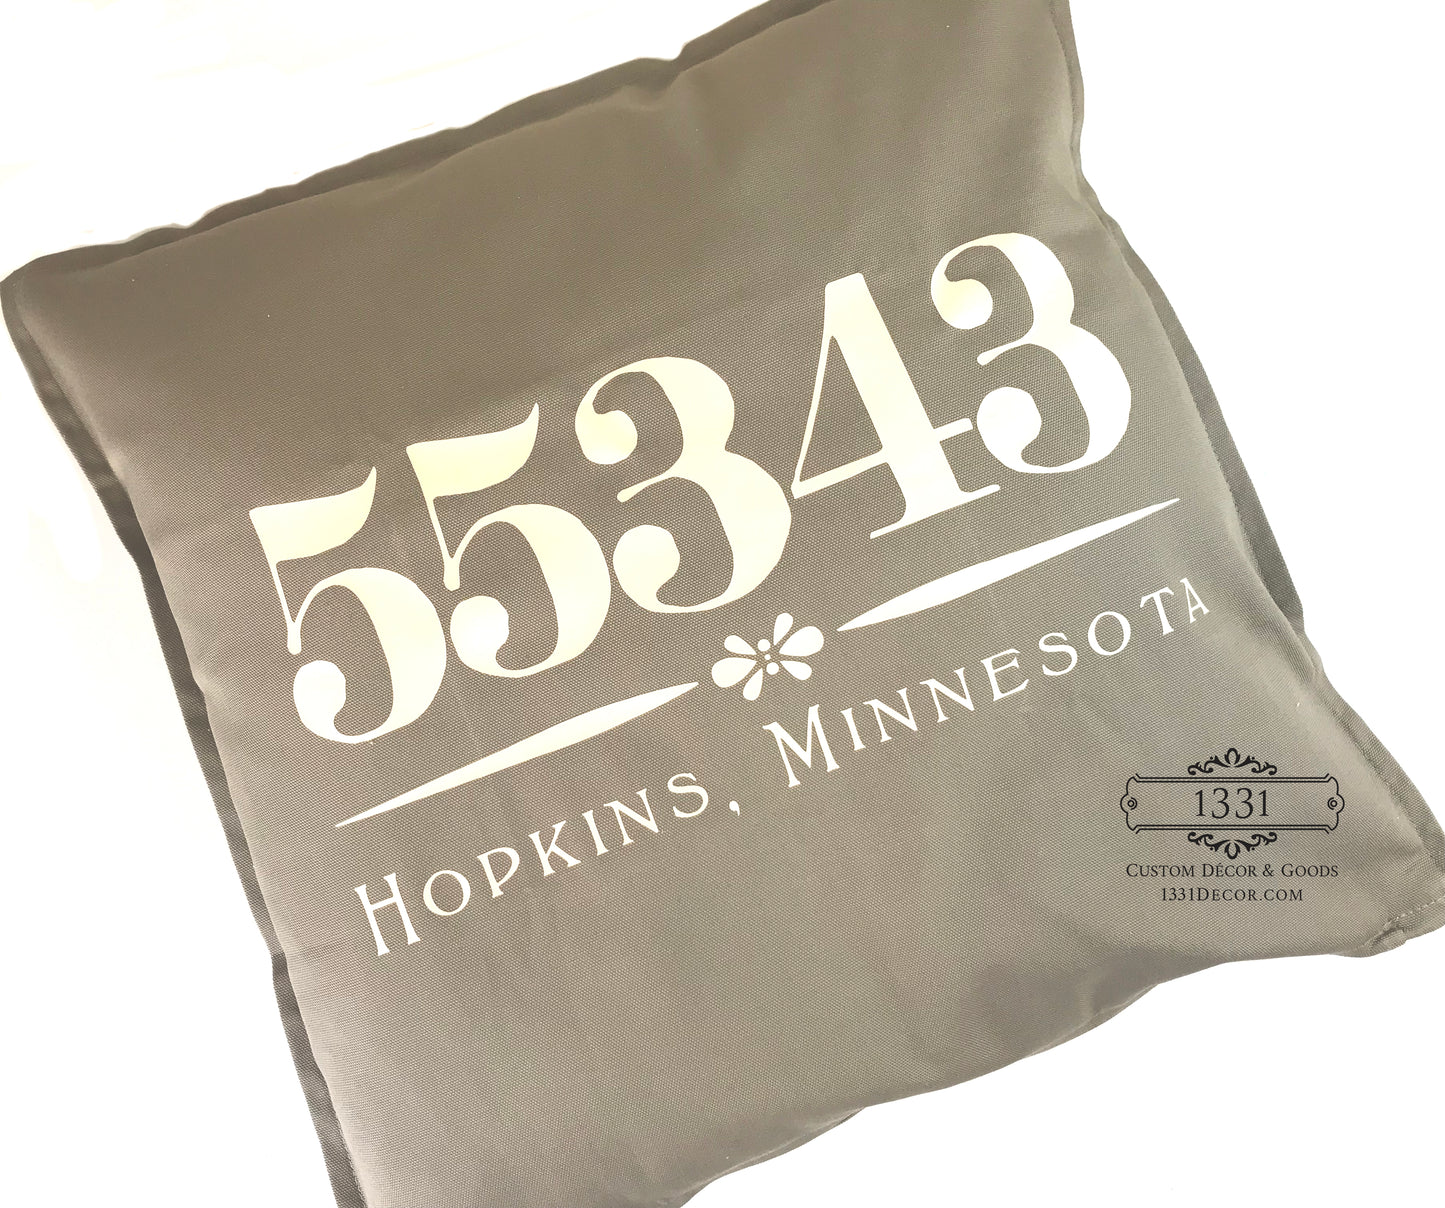 Zip Code Personalized Pillow Cover